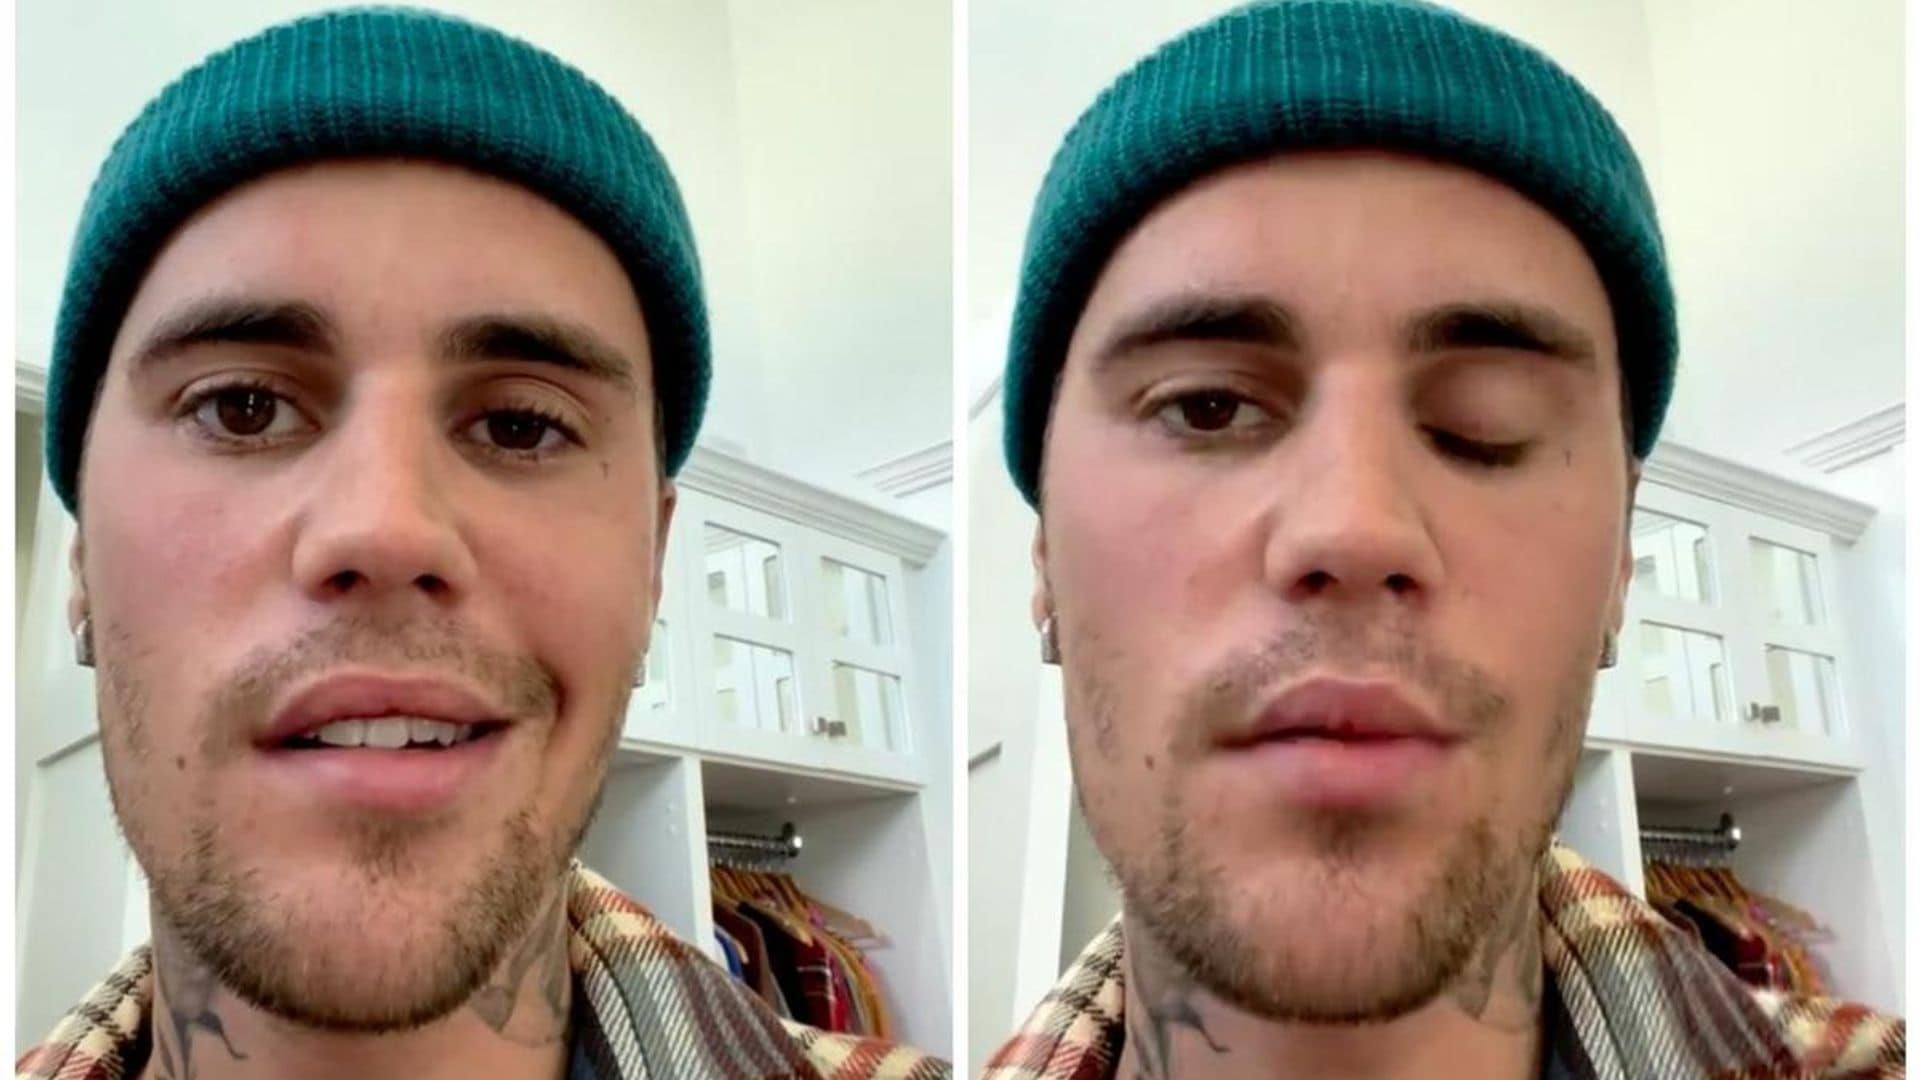 Justin Bieber has been diagnosed with Ramsay Hunt Syndrome; his face is partially paralyzed